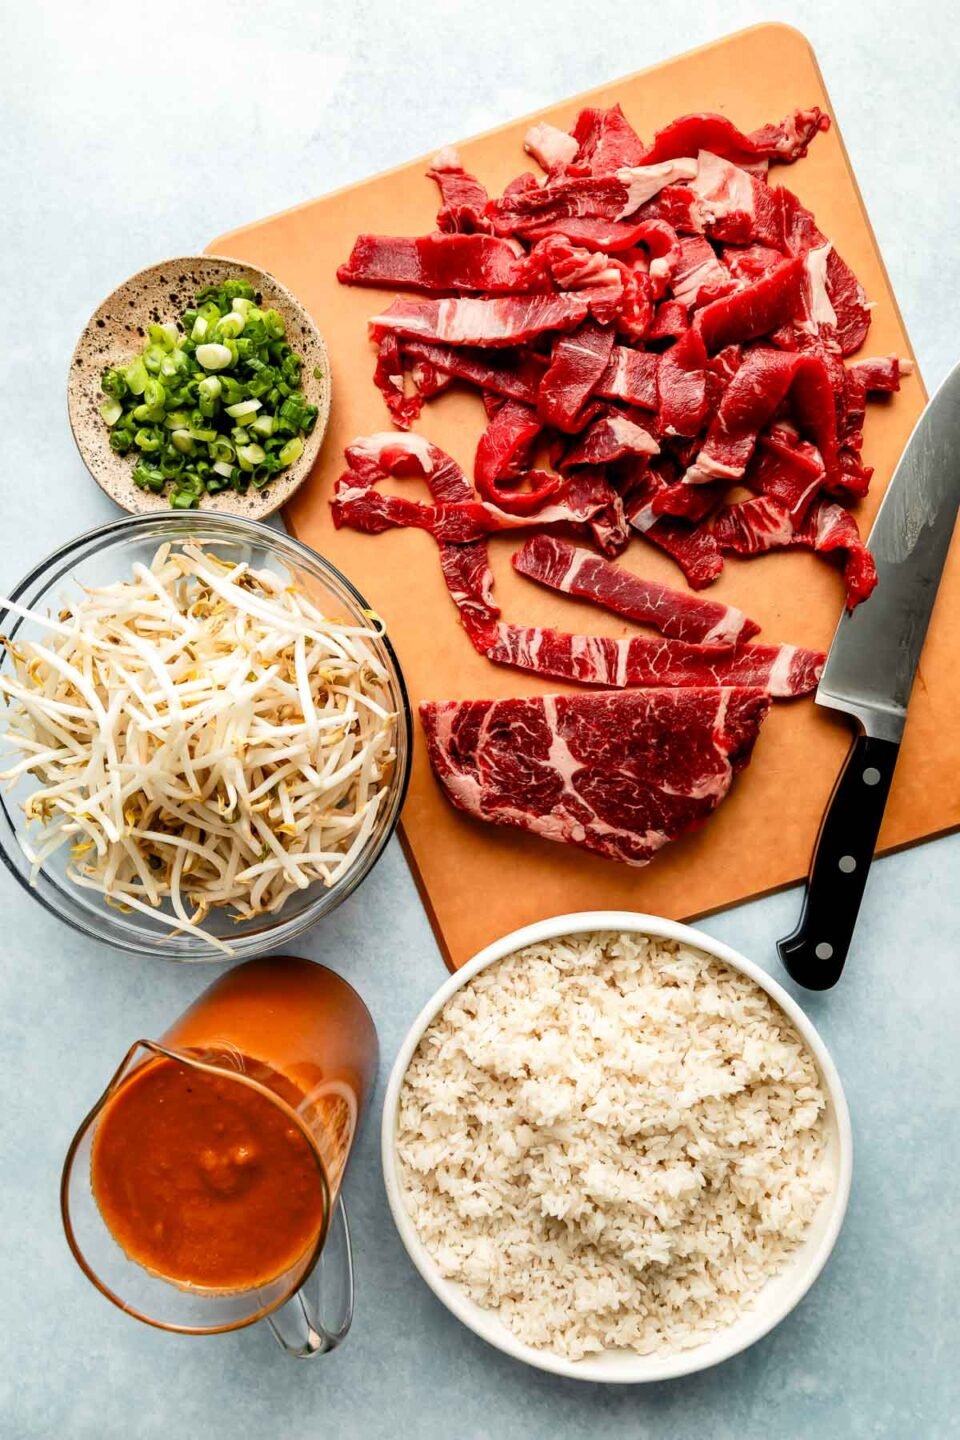 An overhead shot of ingredients in bowls and on a cutting board on a grey surface: sliced ribeye steak, bulgogi marinade, mung bean sprouts, green onions, and white rice.